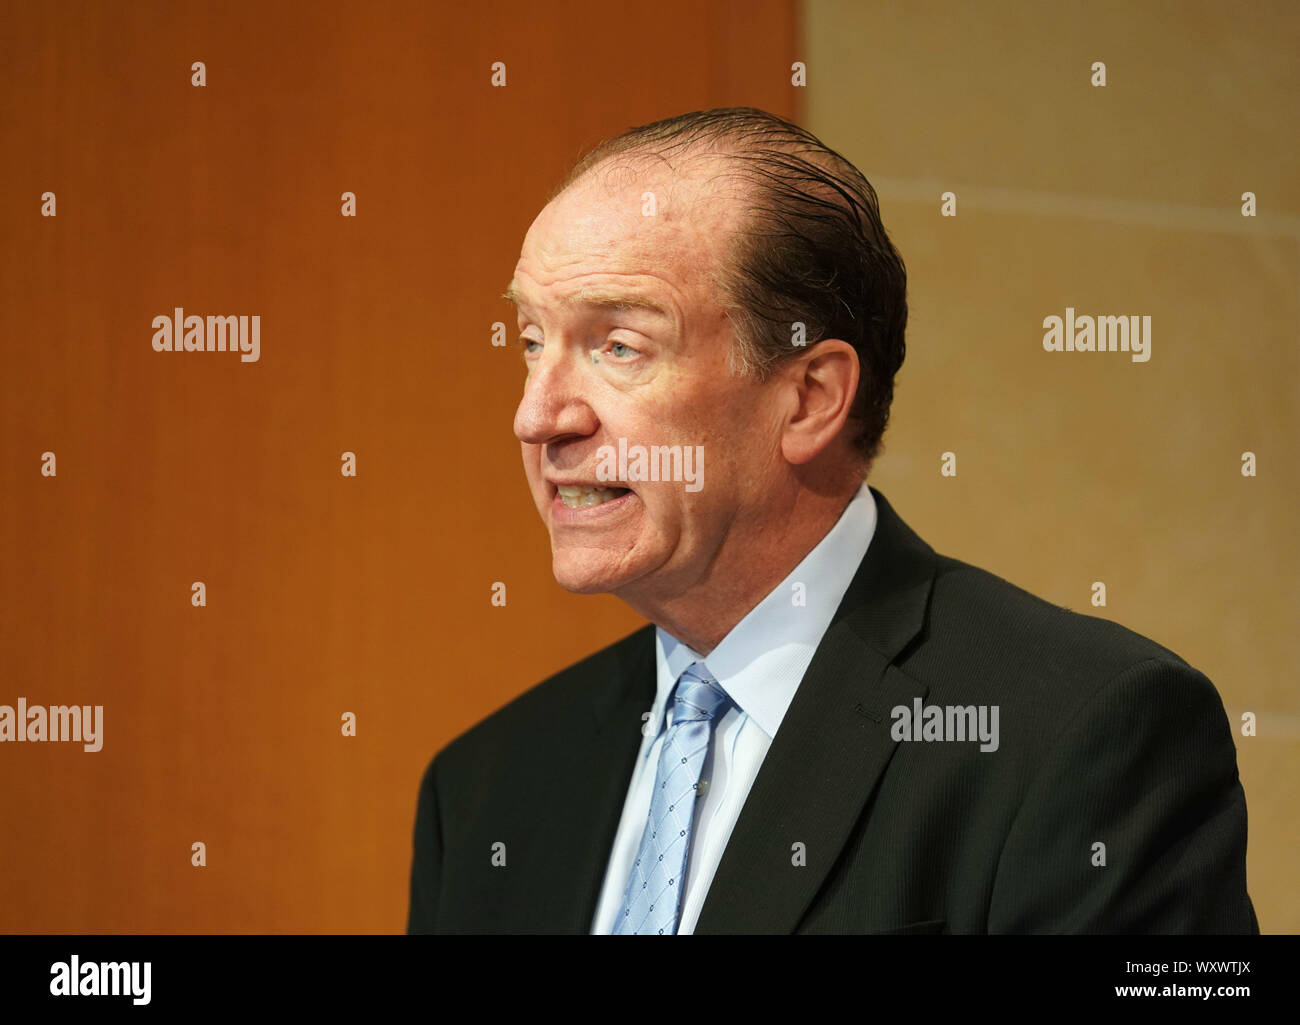 (190918) -- WASHINGTON, Sept. 18, 2019 (Xinhua) -- World Bank President David Malpass delivers a speech at the Peterson Institute for International Economics (PIIE) in Washington, DC, the United States, Sept. 17, 2019. Malpass said Tuesday that global growth prospects are weakening, and investment growth is slowing down, highlighting the urgency to conduct structural reforms in developing countries. In a speech at the PIIE, Malpass said the global economy is expected to decelerate further 'given recent developments,' falling short of the World Bank's June projection of 2.6 percent for 2 Stock Photo